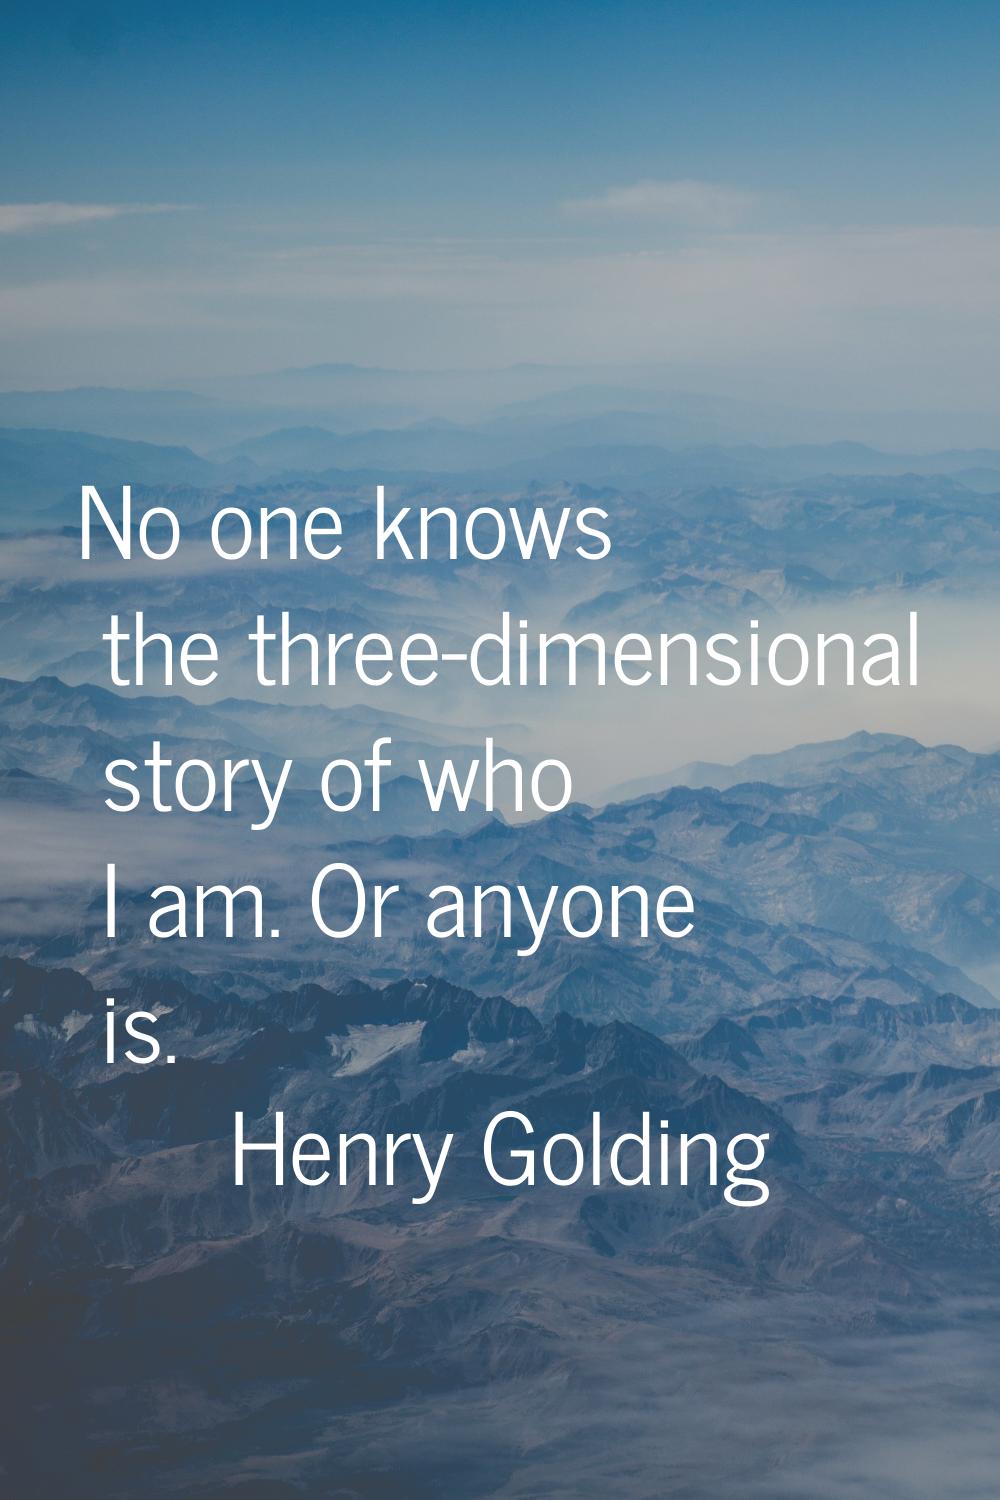 No one knows the three-dimensional story of who I am. Or anyone is.